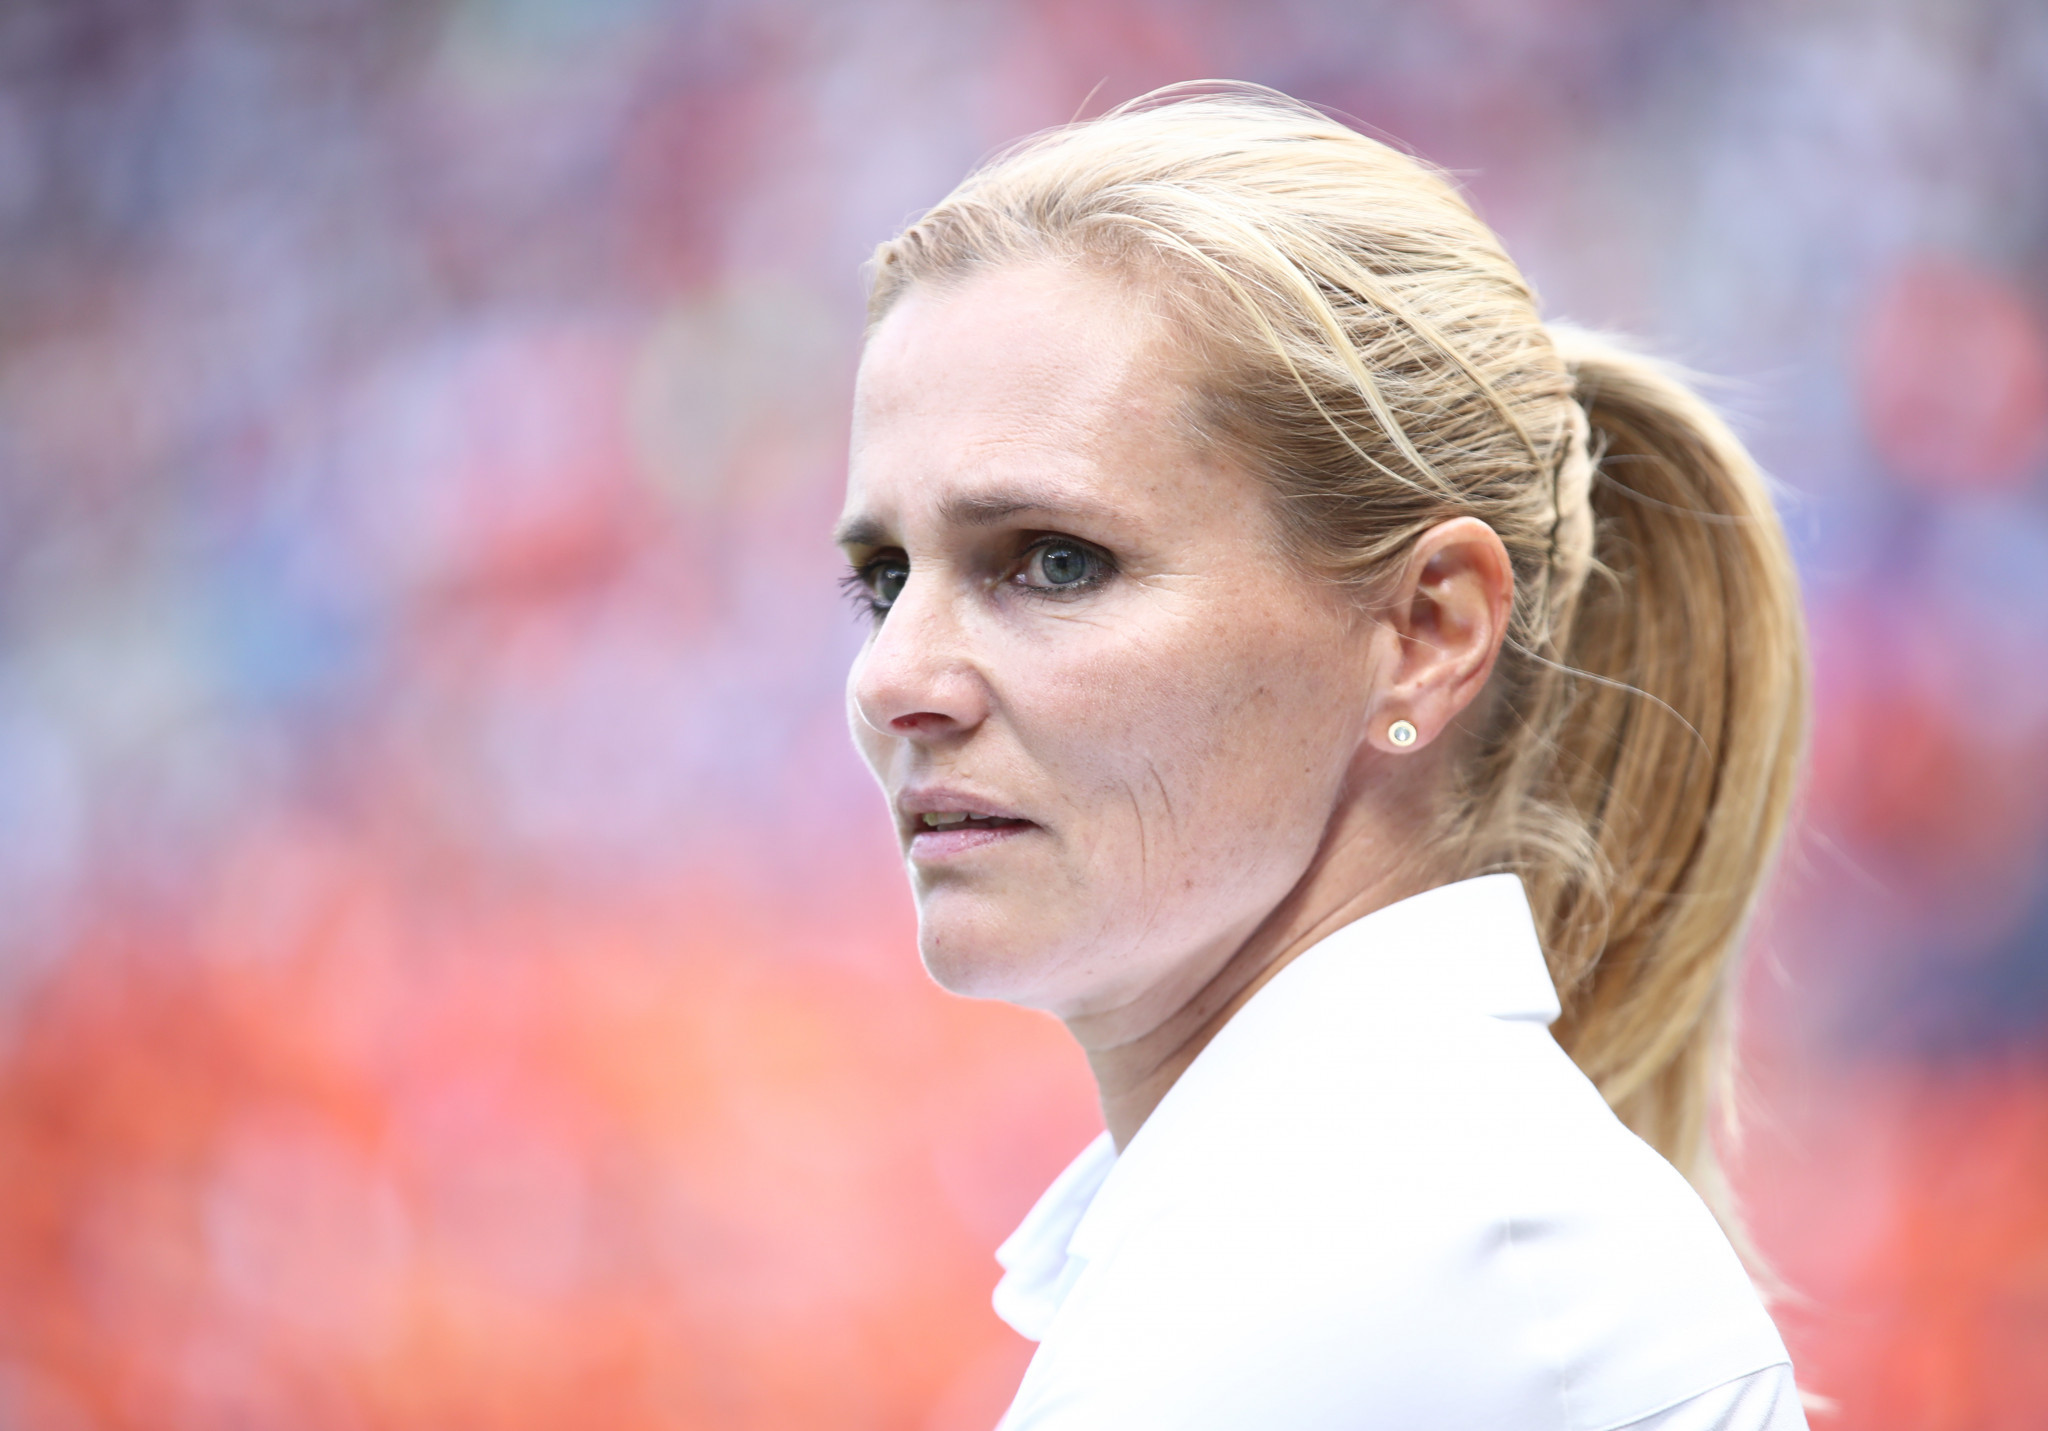 Sarina Wiegman has been one of the most successful international football managers in recent years ©Getty Images